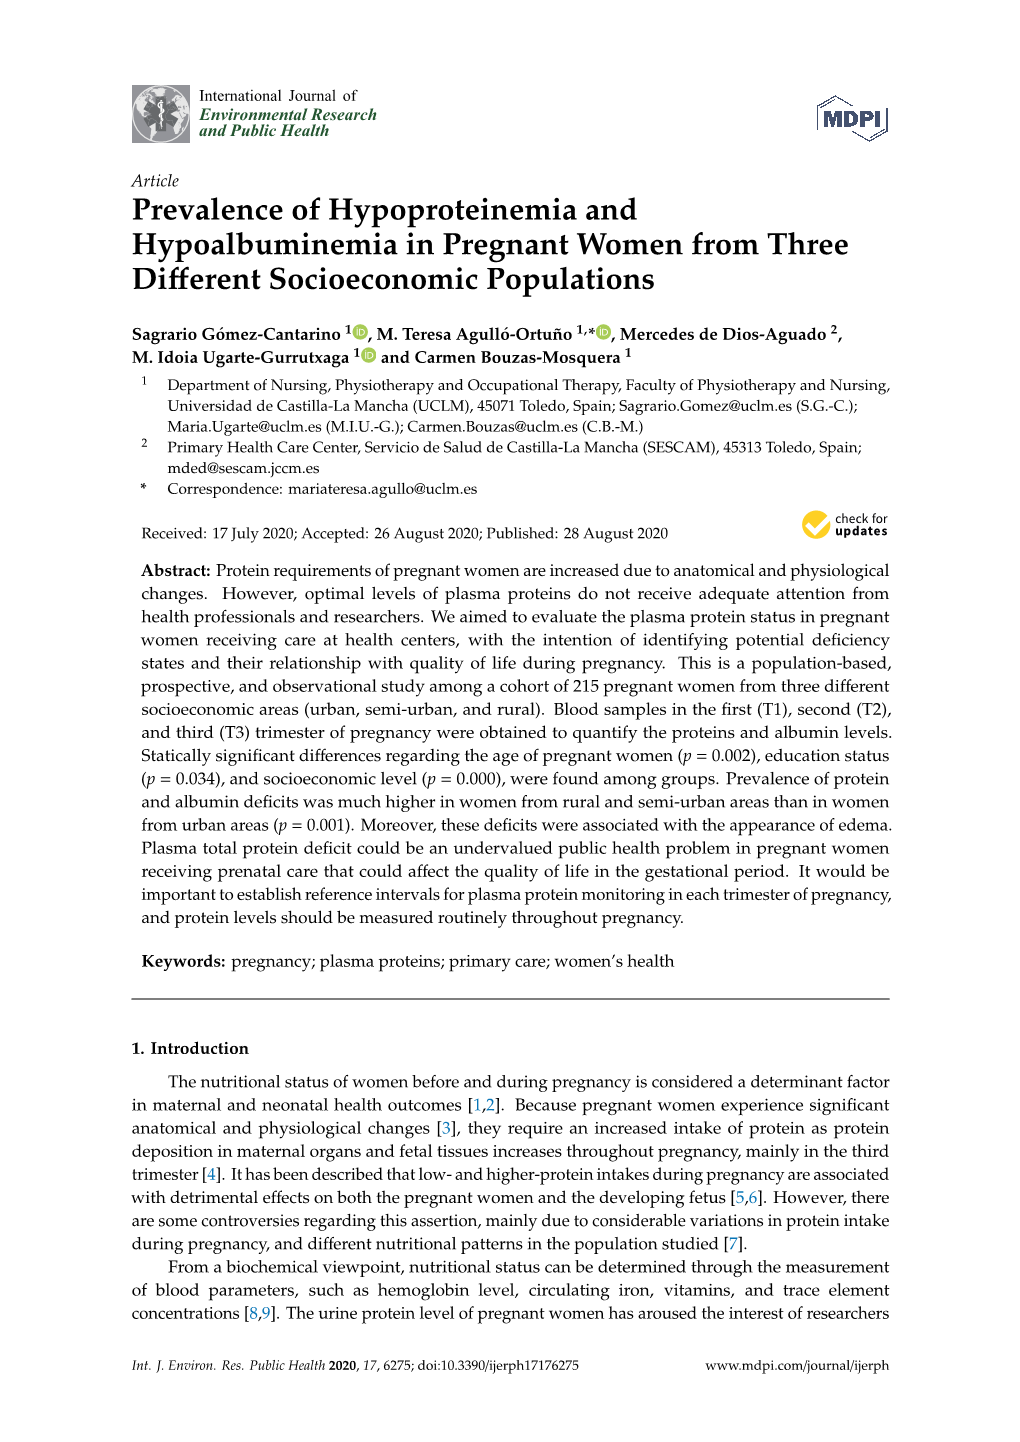 Prevalence of Hypoproteinemia and Hypoalbuminemia in Pregnant Women from Three Different Socioeconomic Populations